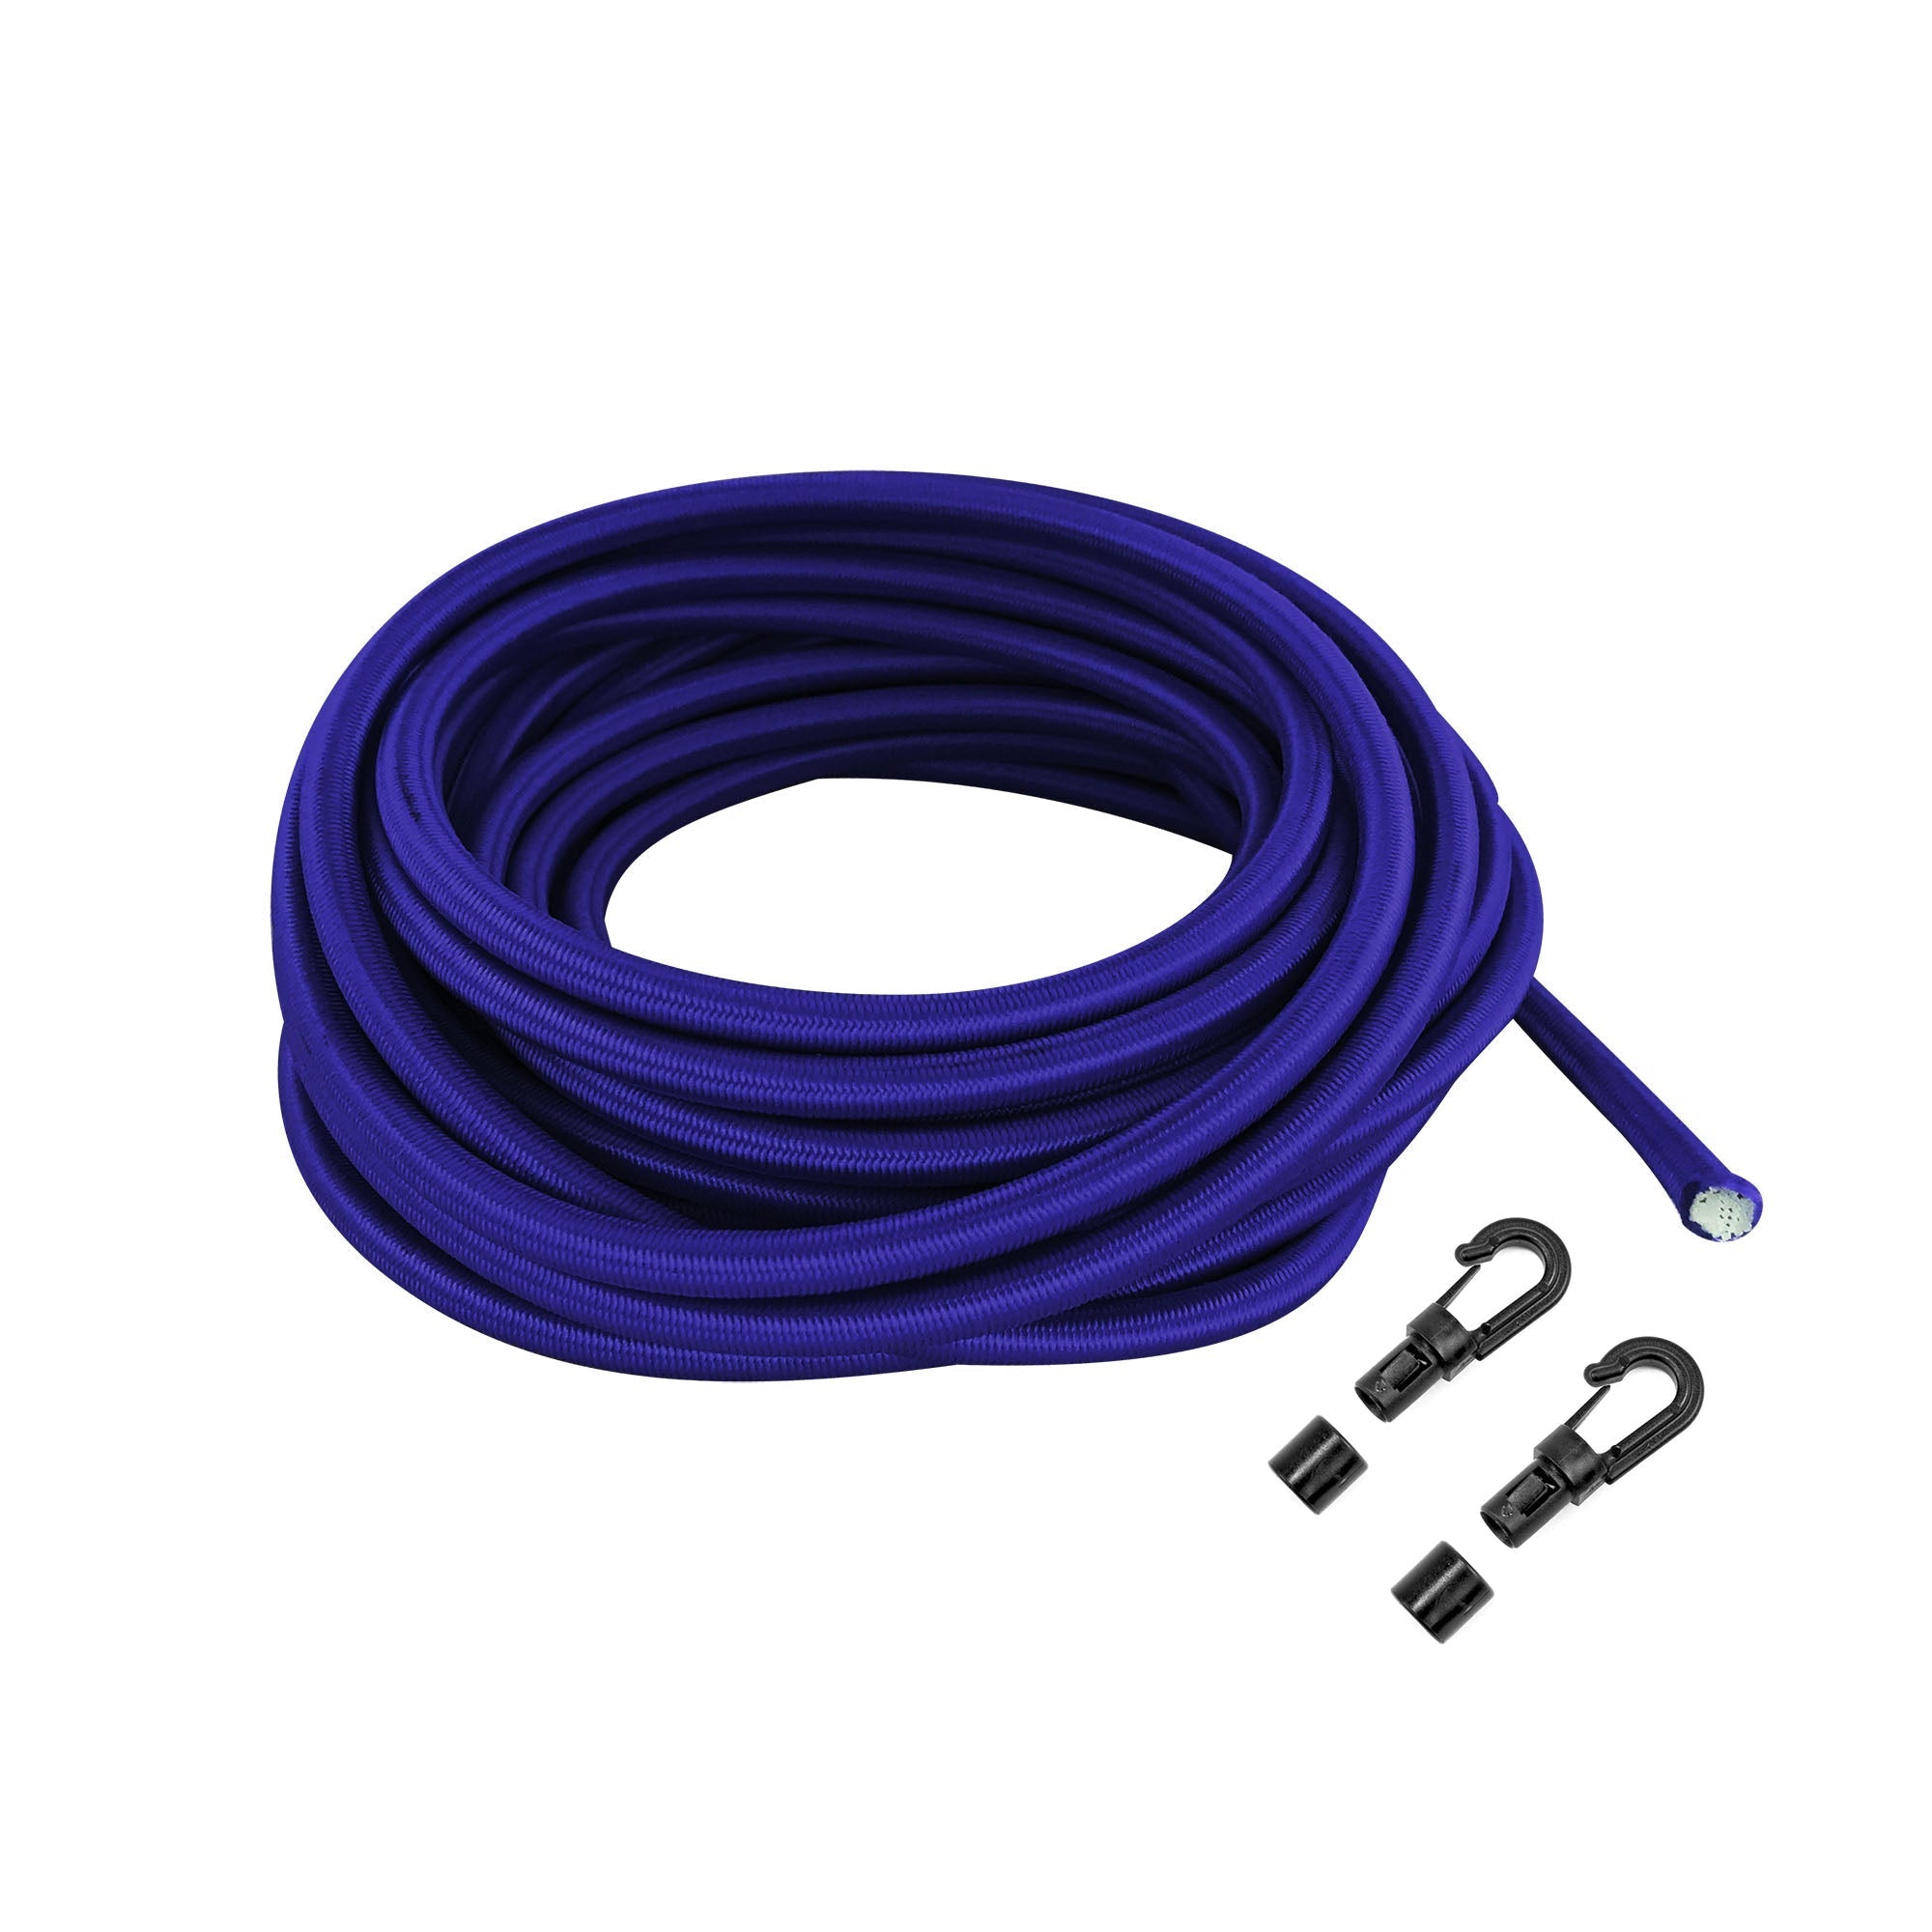 Bungee Cord with S Hooks - 30' - Vibe Kayaks